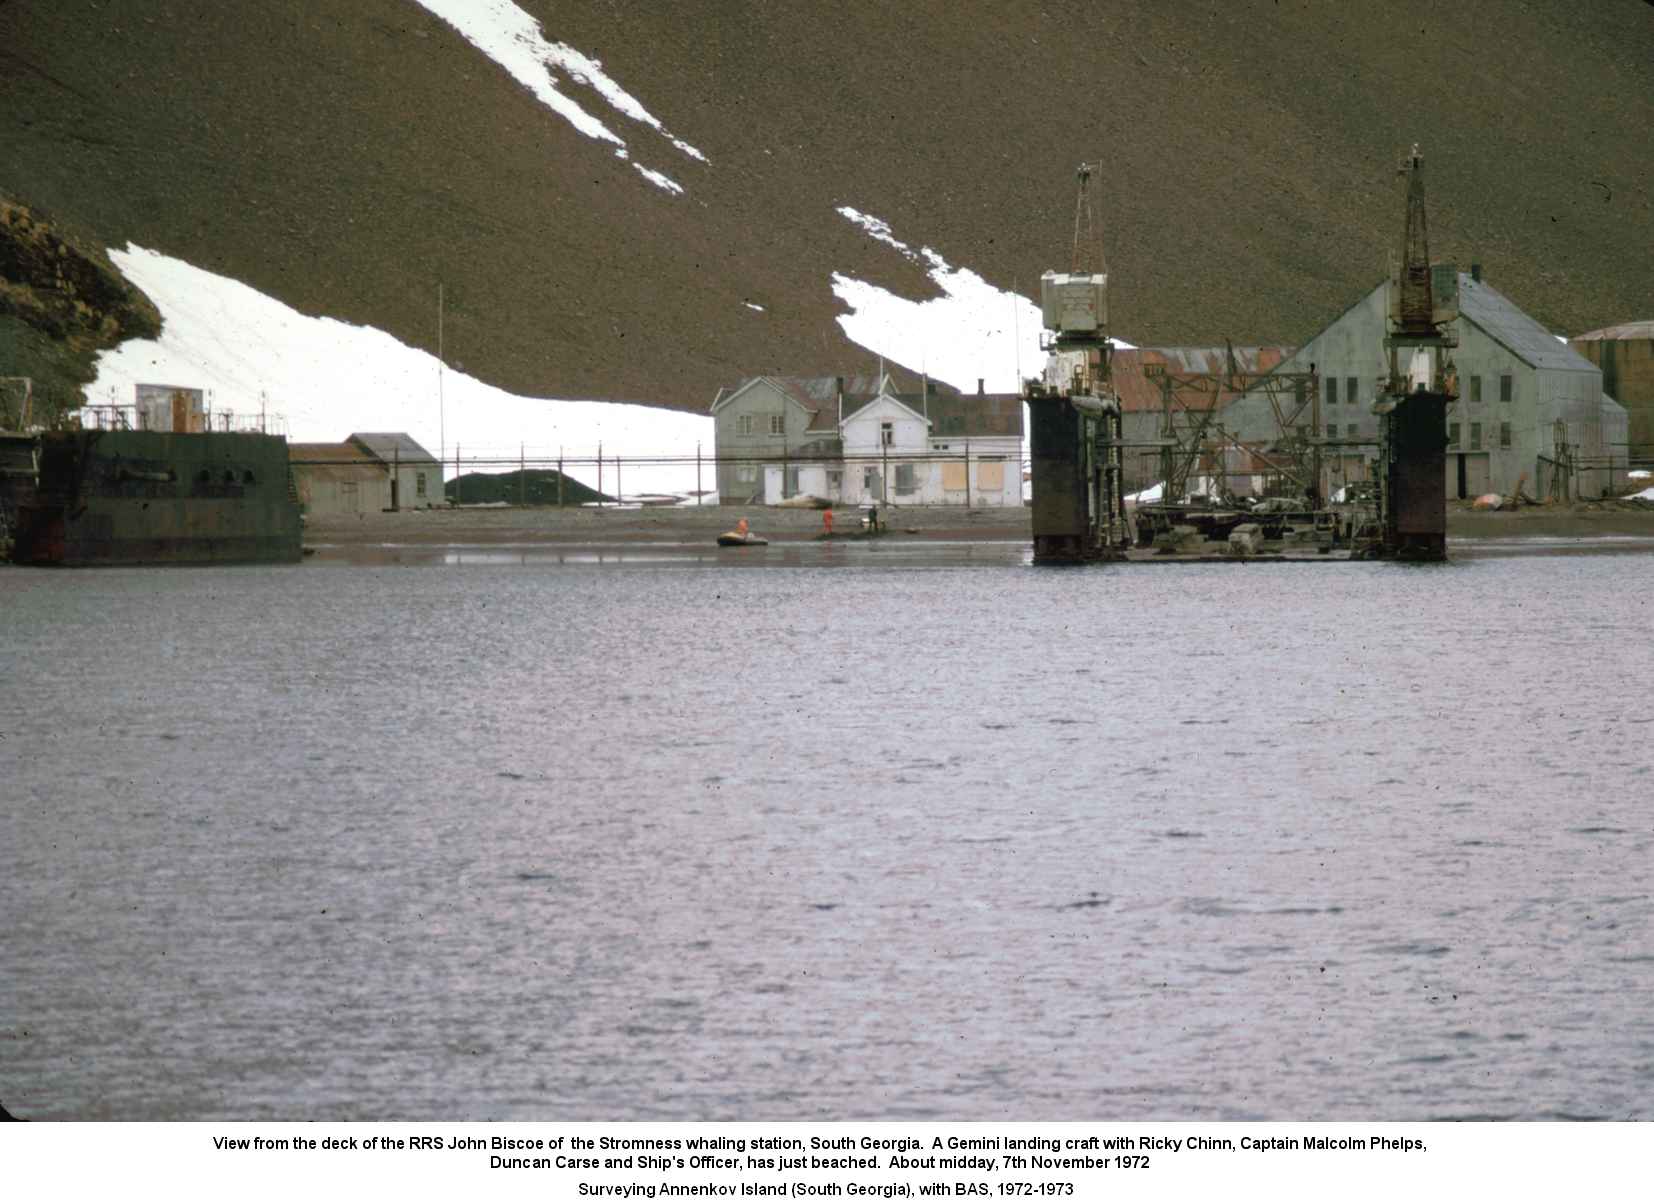 View from the deck of the RRS John Biscoe of  the Stromness whaling station, South Georgia.  A Gemini landing craft with Ricky Chinn, Captain Malcolm Phelps,
Duncan Carse and Ship's Officer, has just beached.  About midday, 7th November 1972.